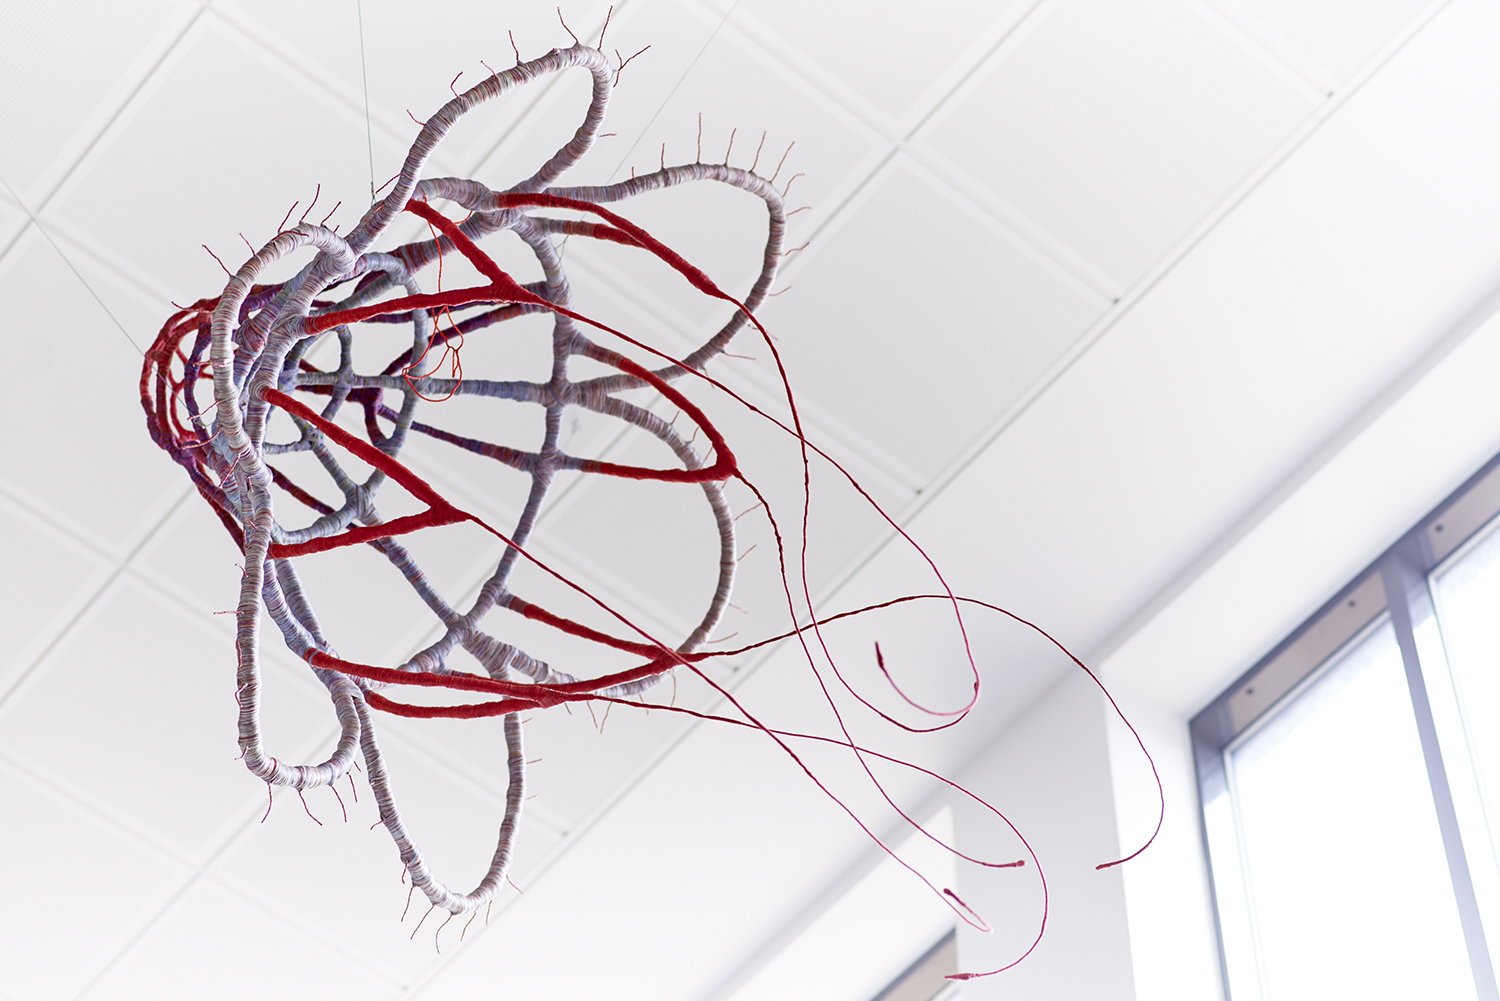 A sculpture of wires in red and grey silk.